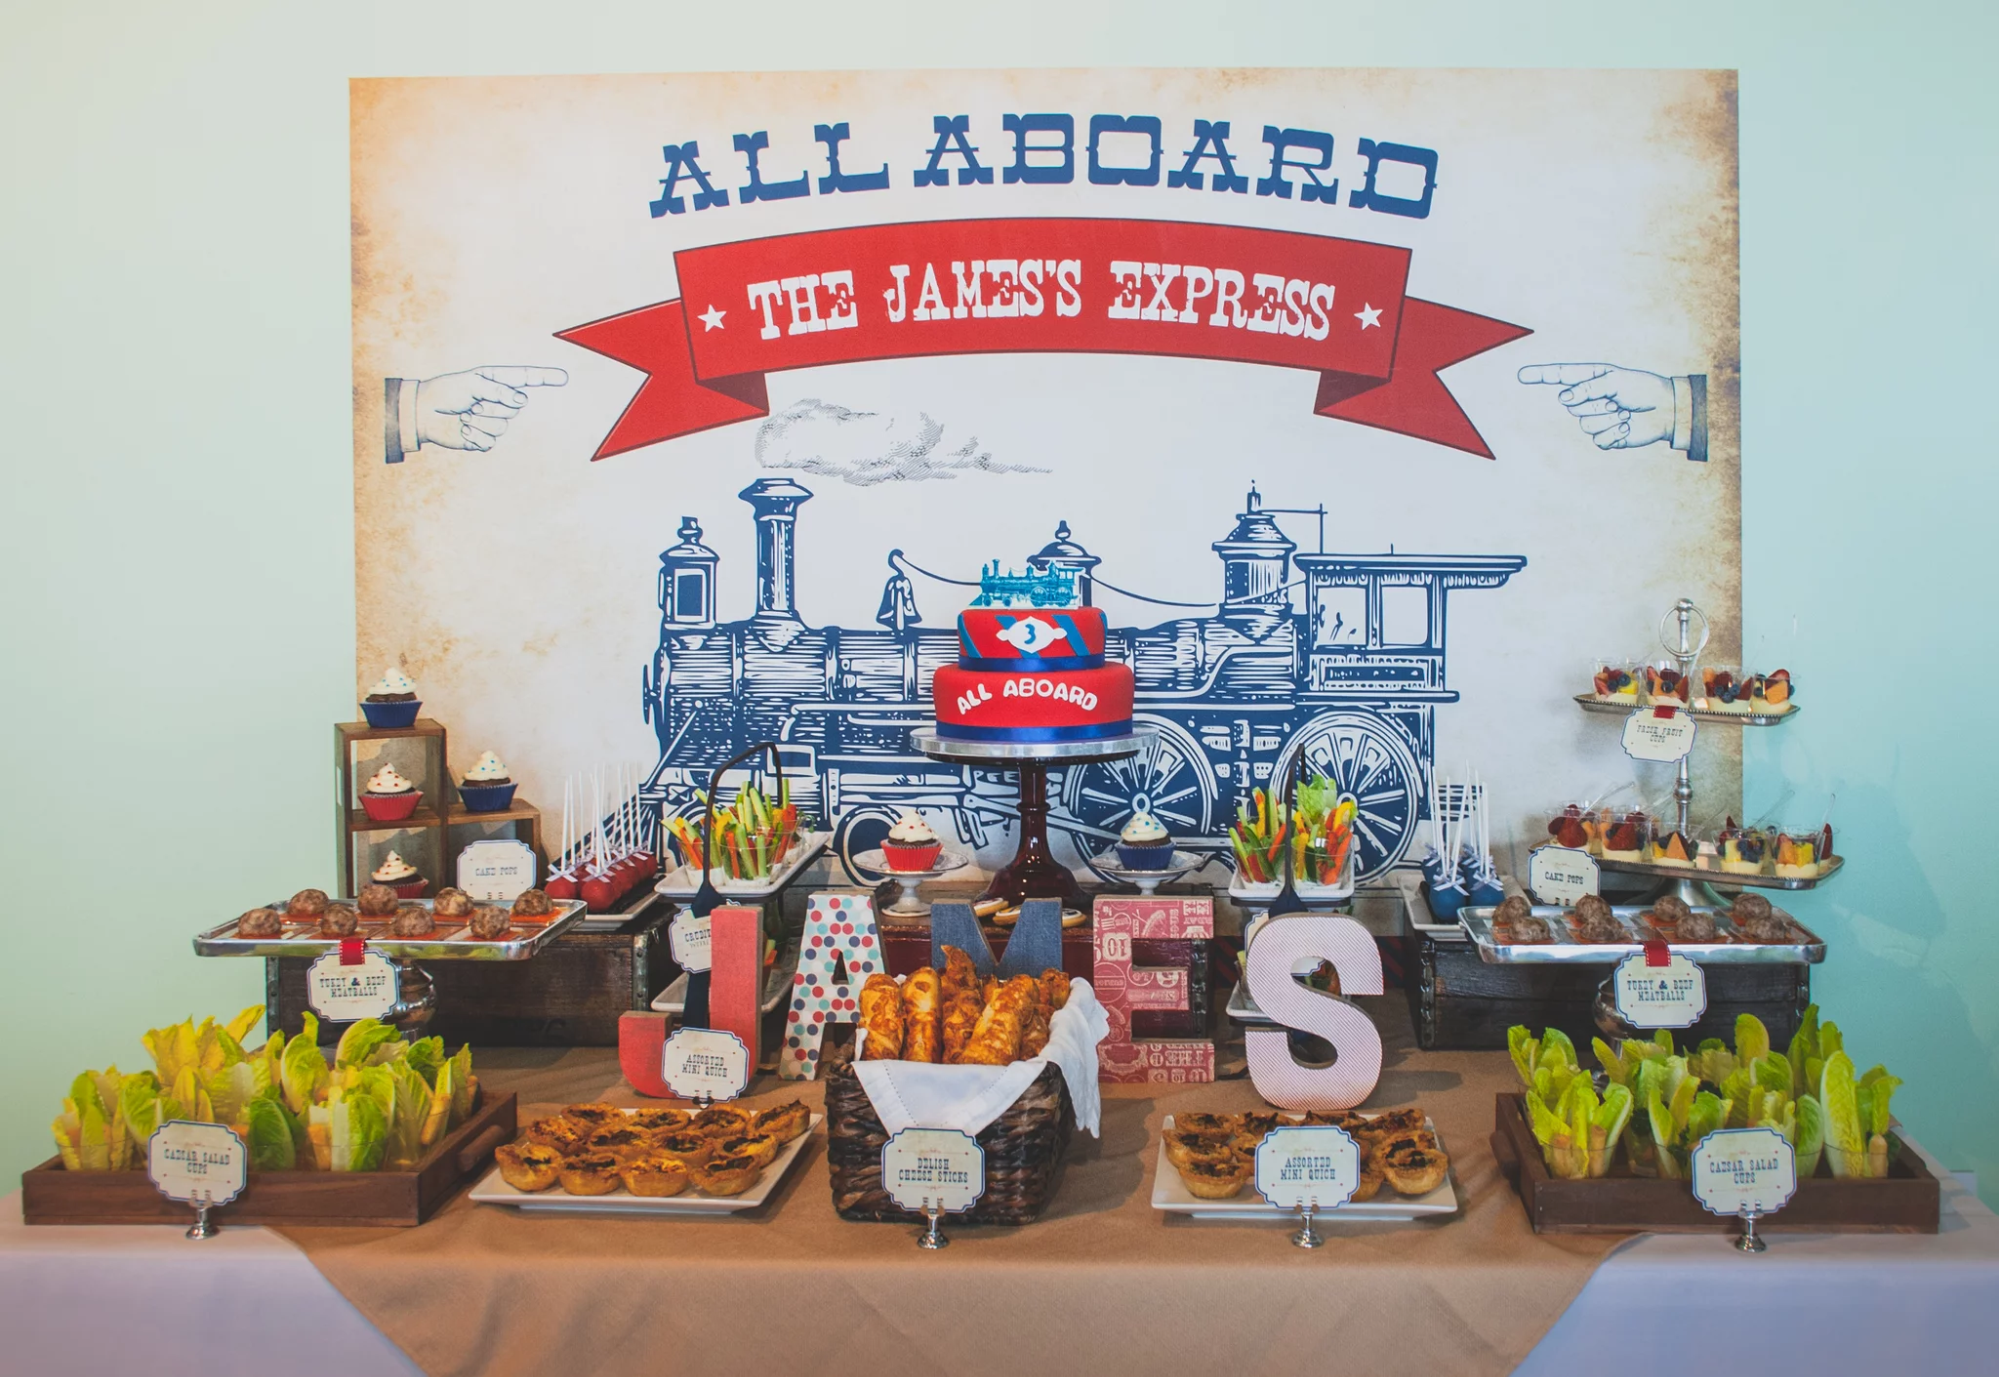 A vintage train-themed birthday party idea for a 3-year old